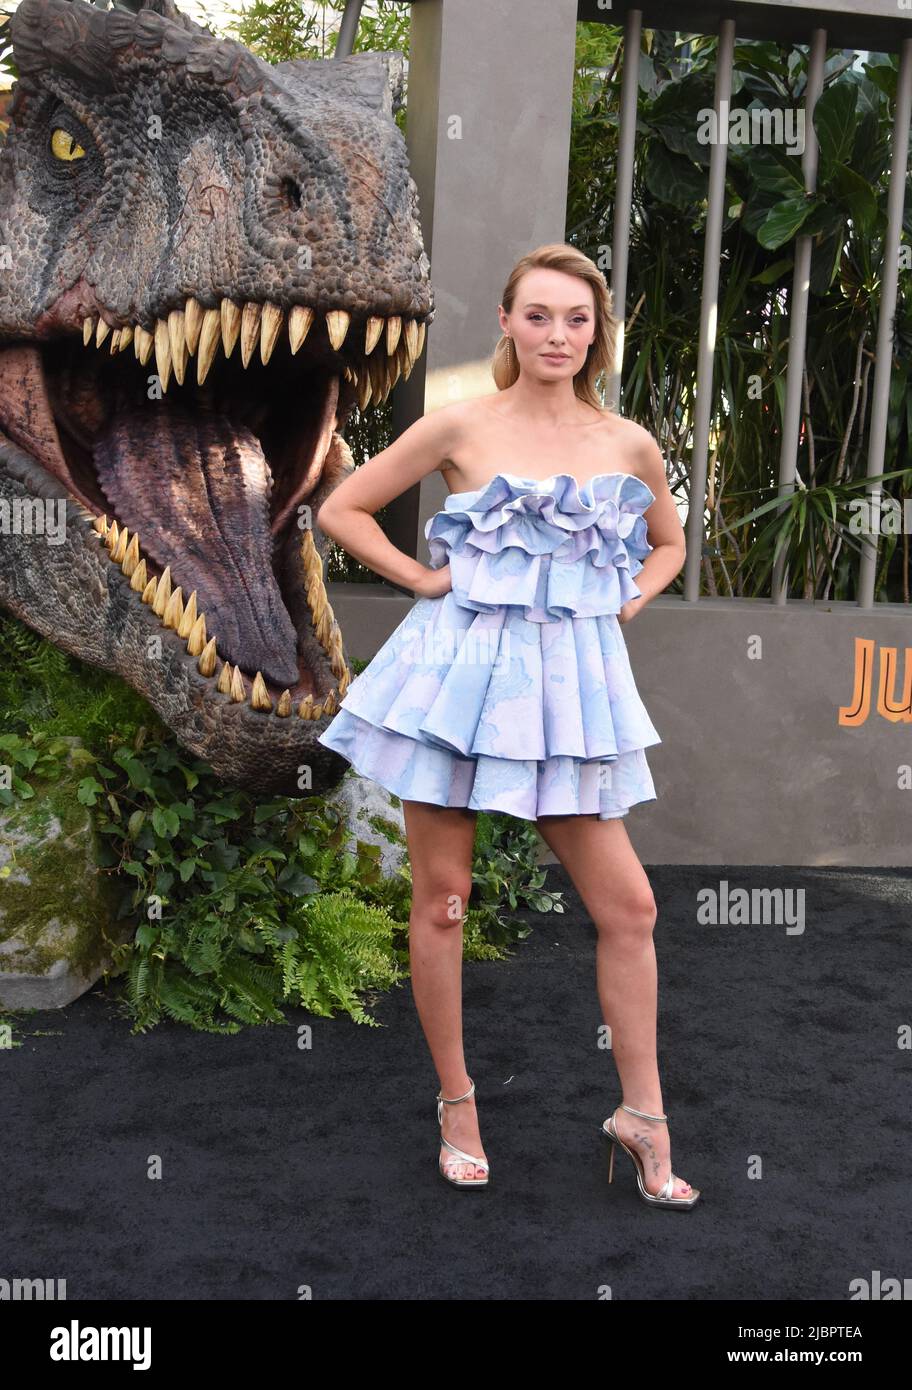 Hollywood, California, USA 6th June 2022 Actress Elva Trill attends Universal Pictures Presents The World Premiere of 'Jurassic World Dominion' at TCL Chinese Theatre on June 6, 2022 in Hollywood, California, USA. Photo by Barry King/Alamy Stock Photo Stock Photo